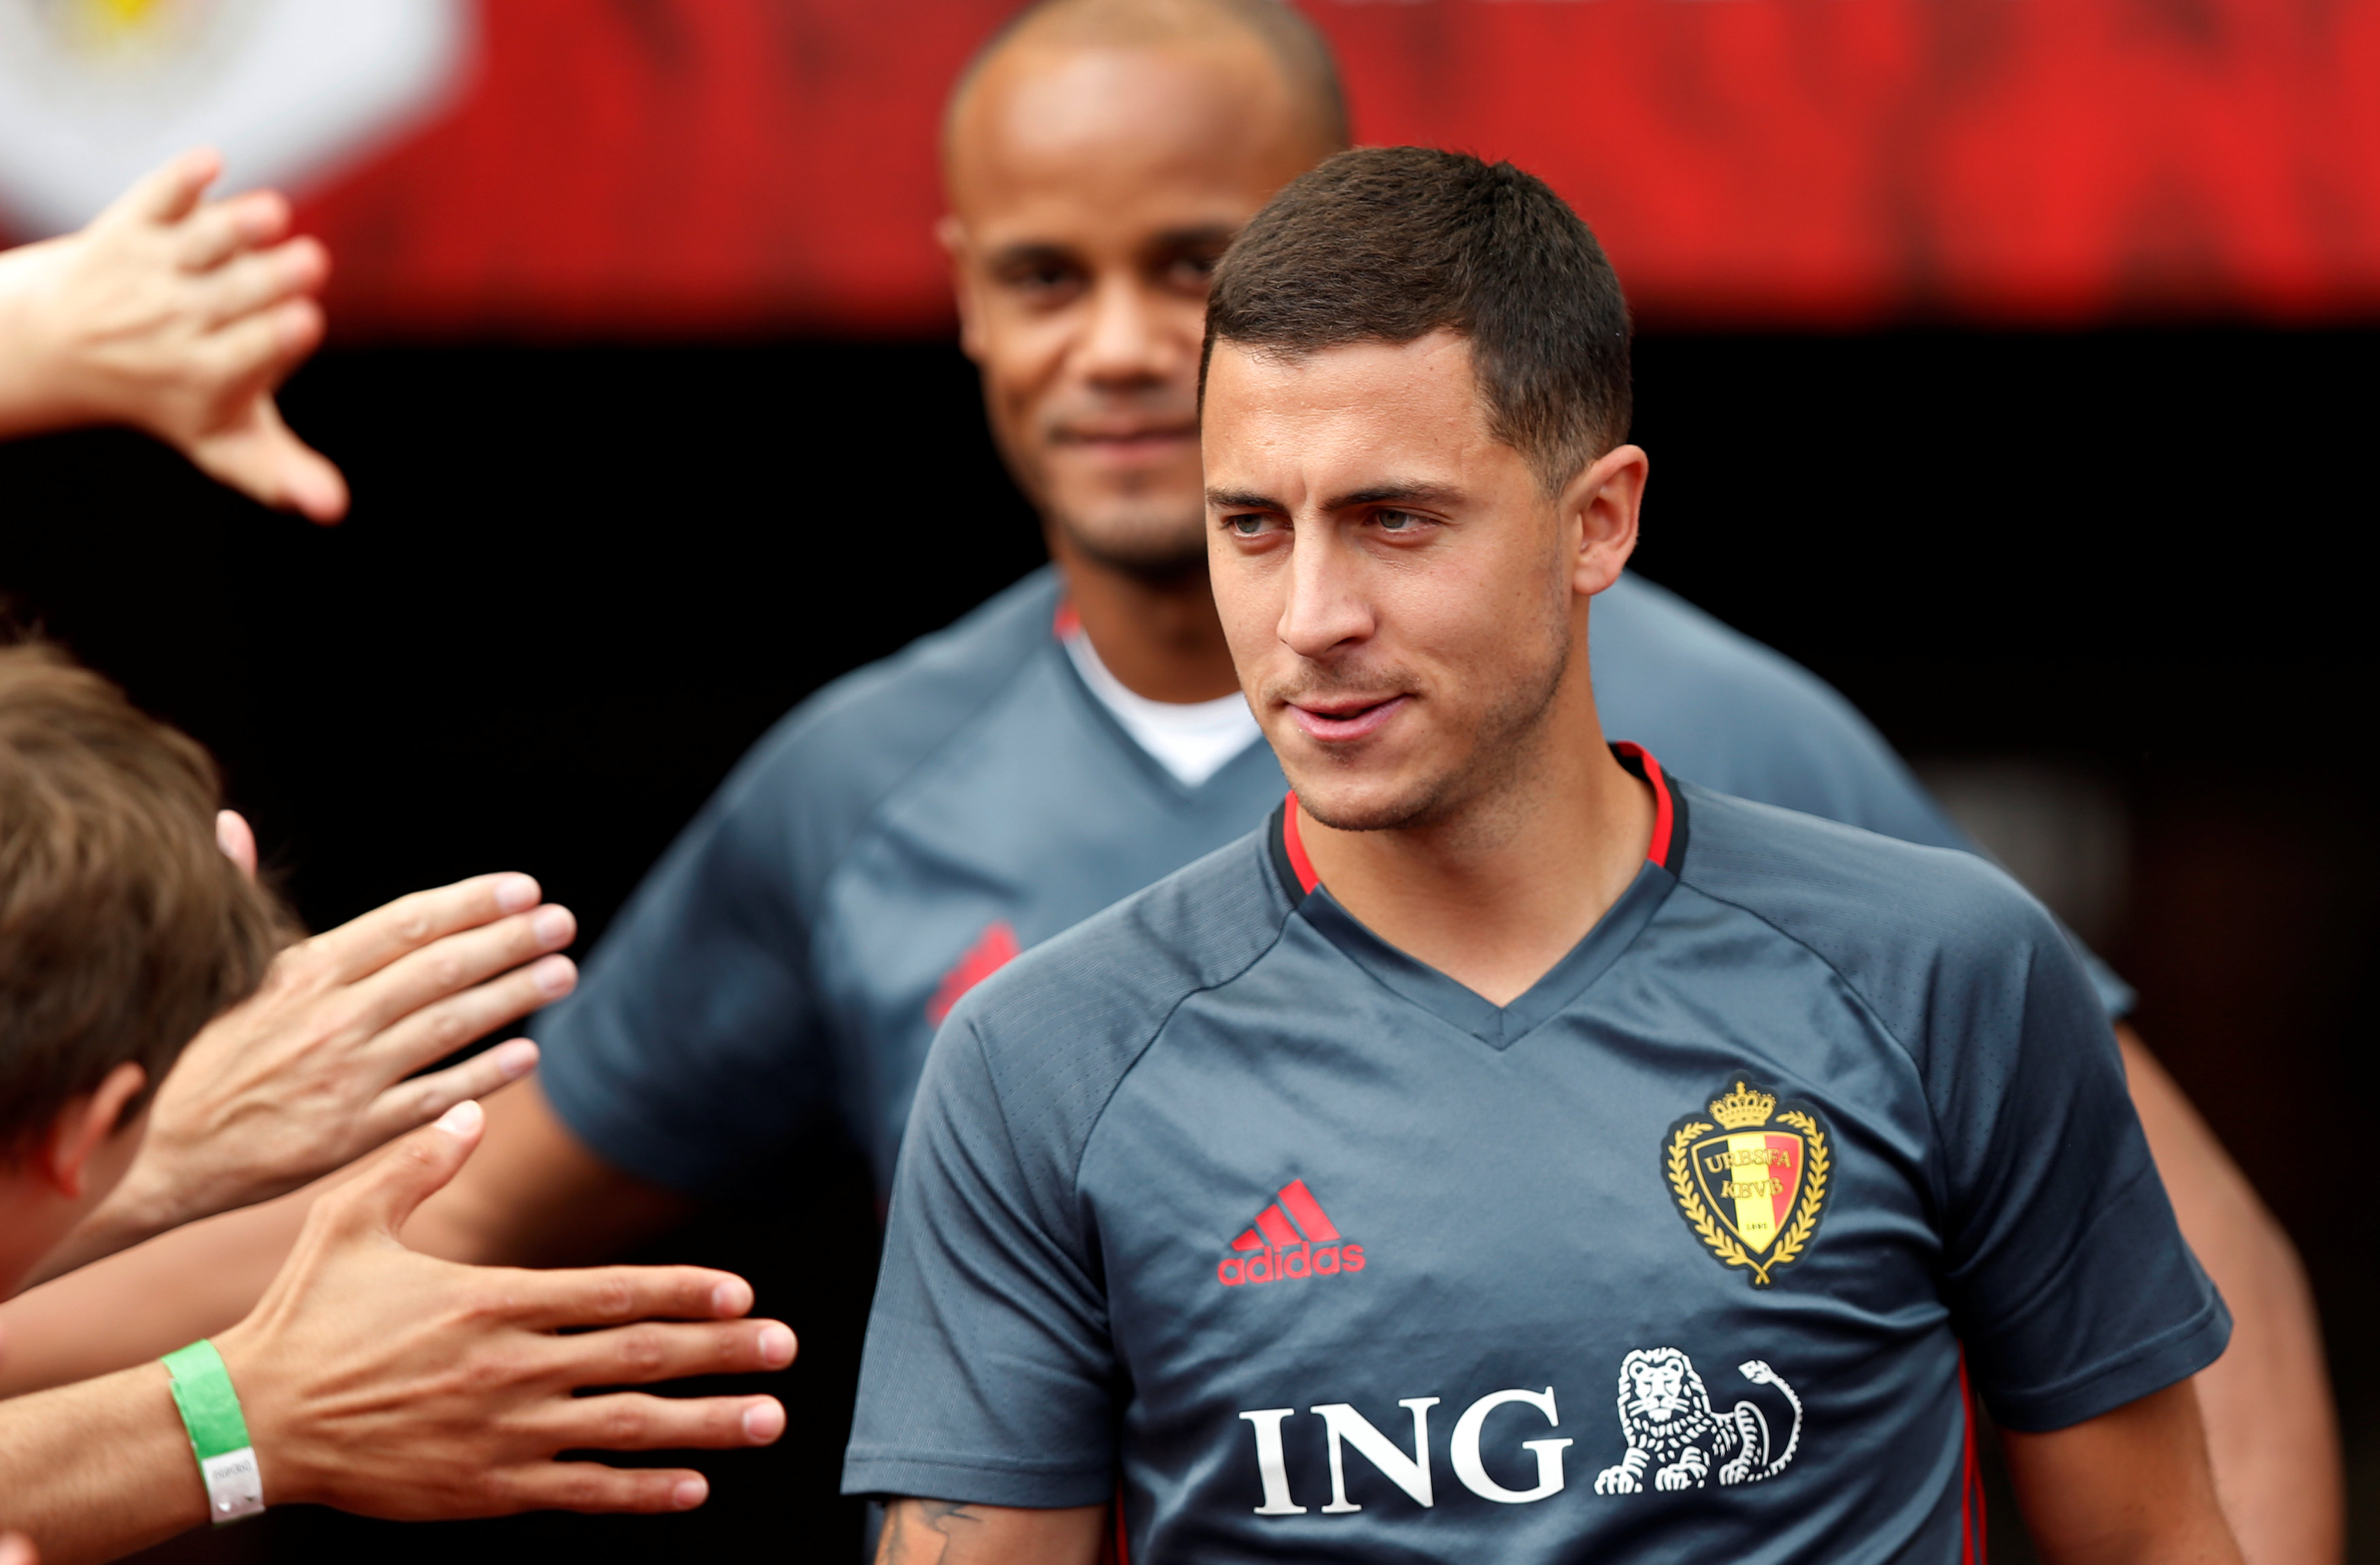 Football: Eden Hazard to miss Belgium matches after fracturing ankle